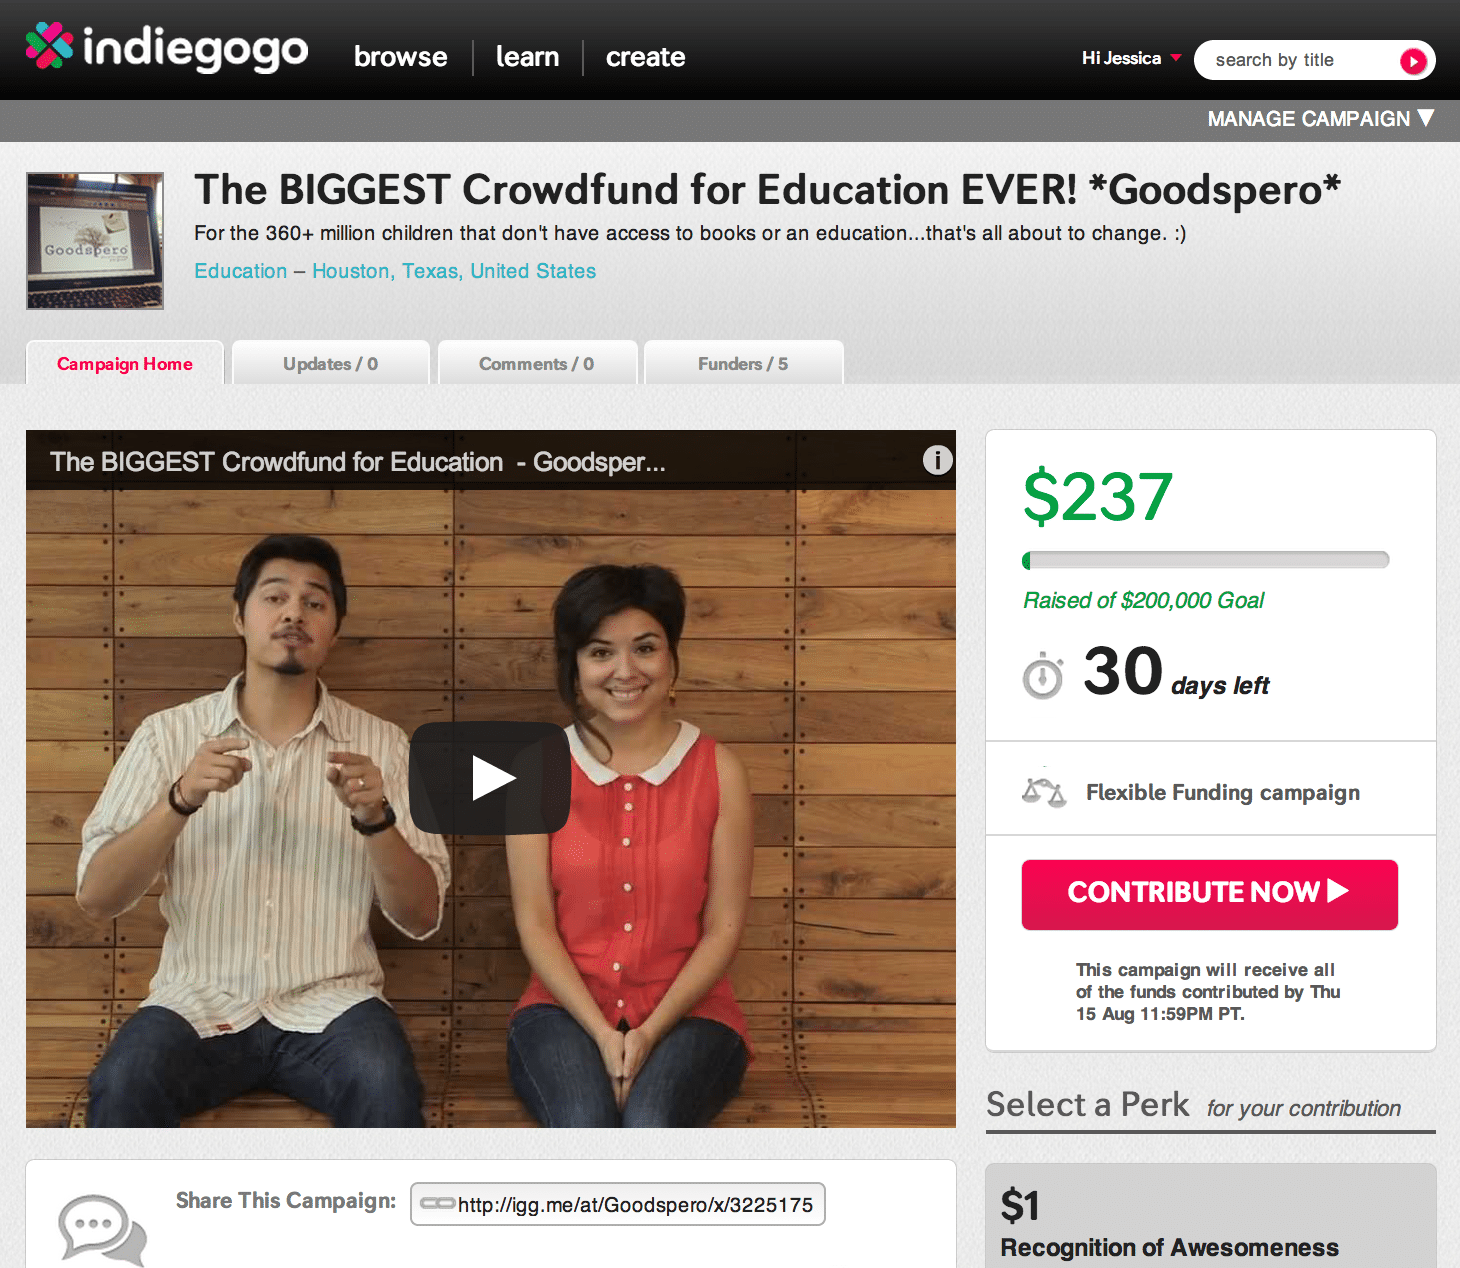 Screenshot photo of goodspero crowdfunding campaign page on indiegogo featuring video thumbnail of founders